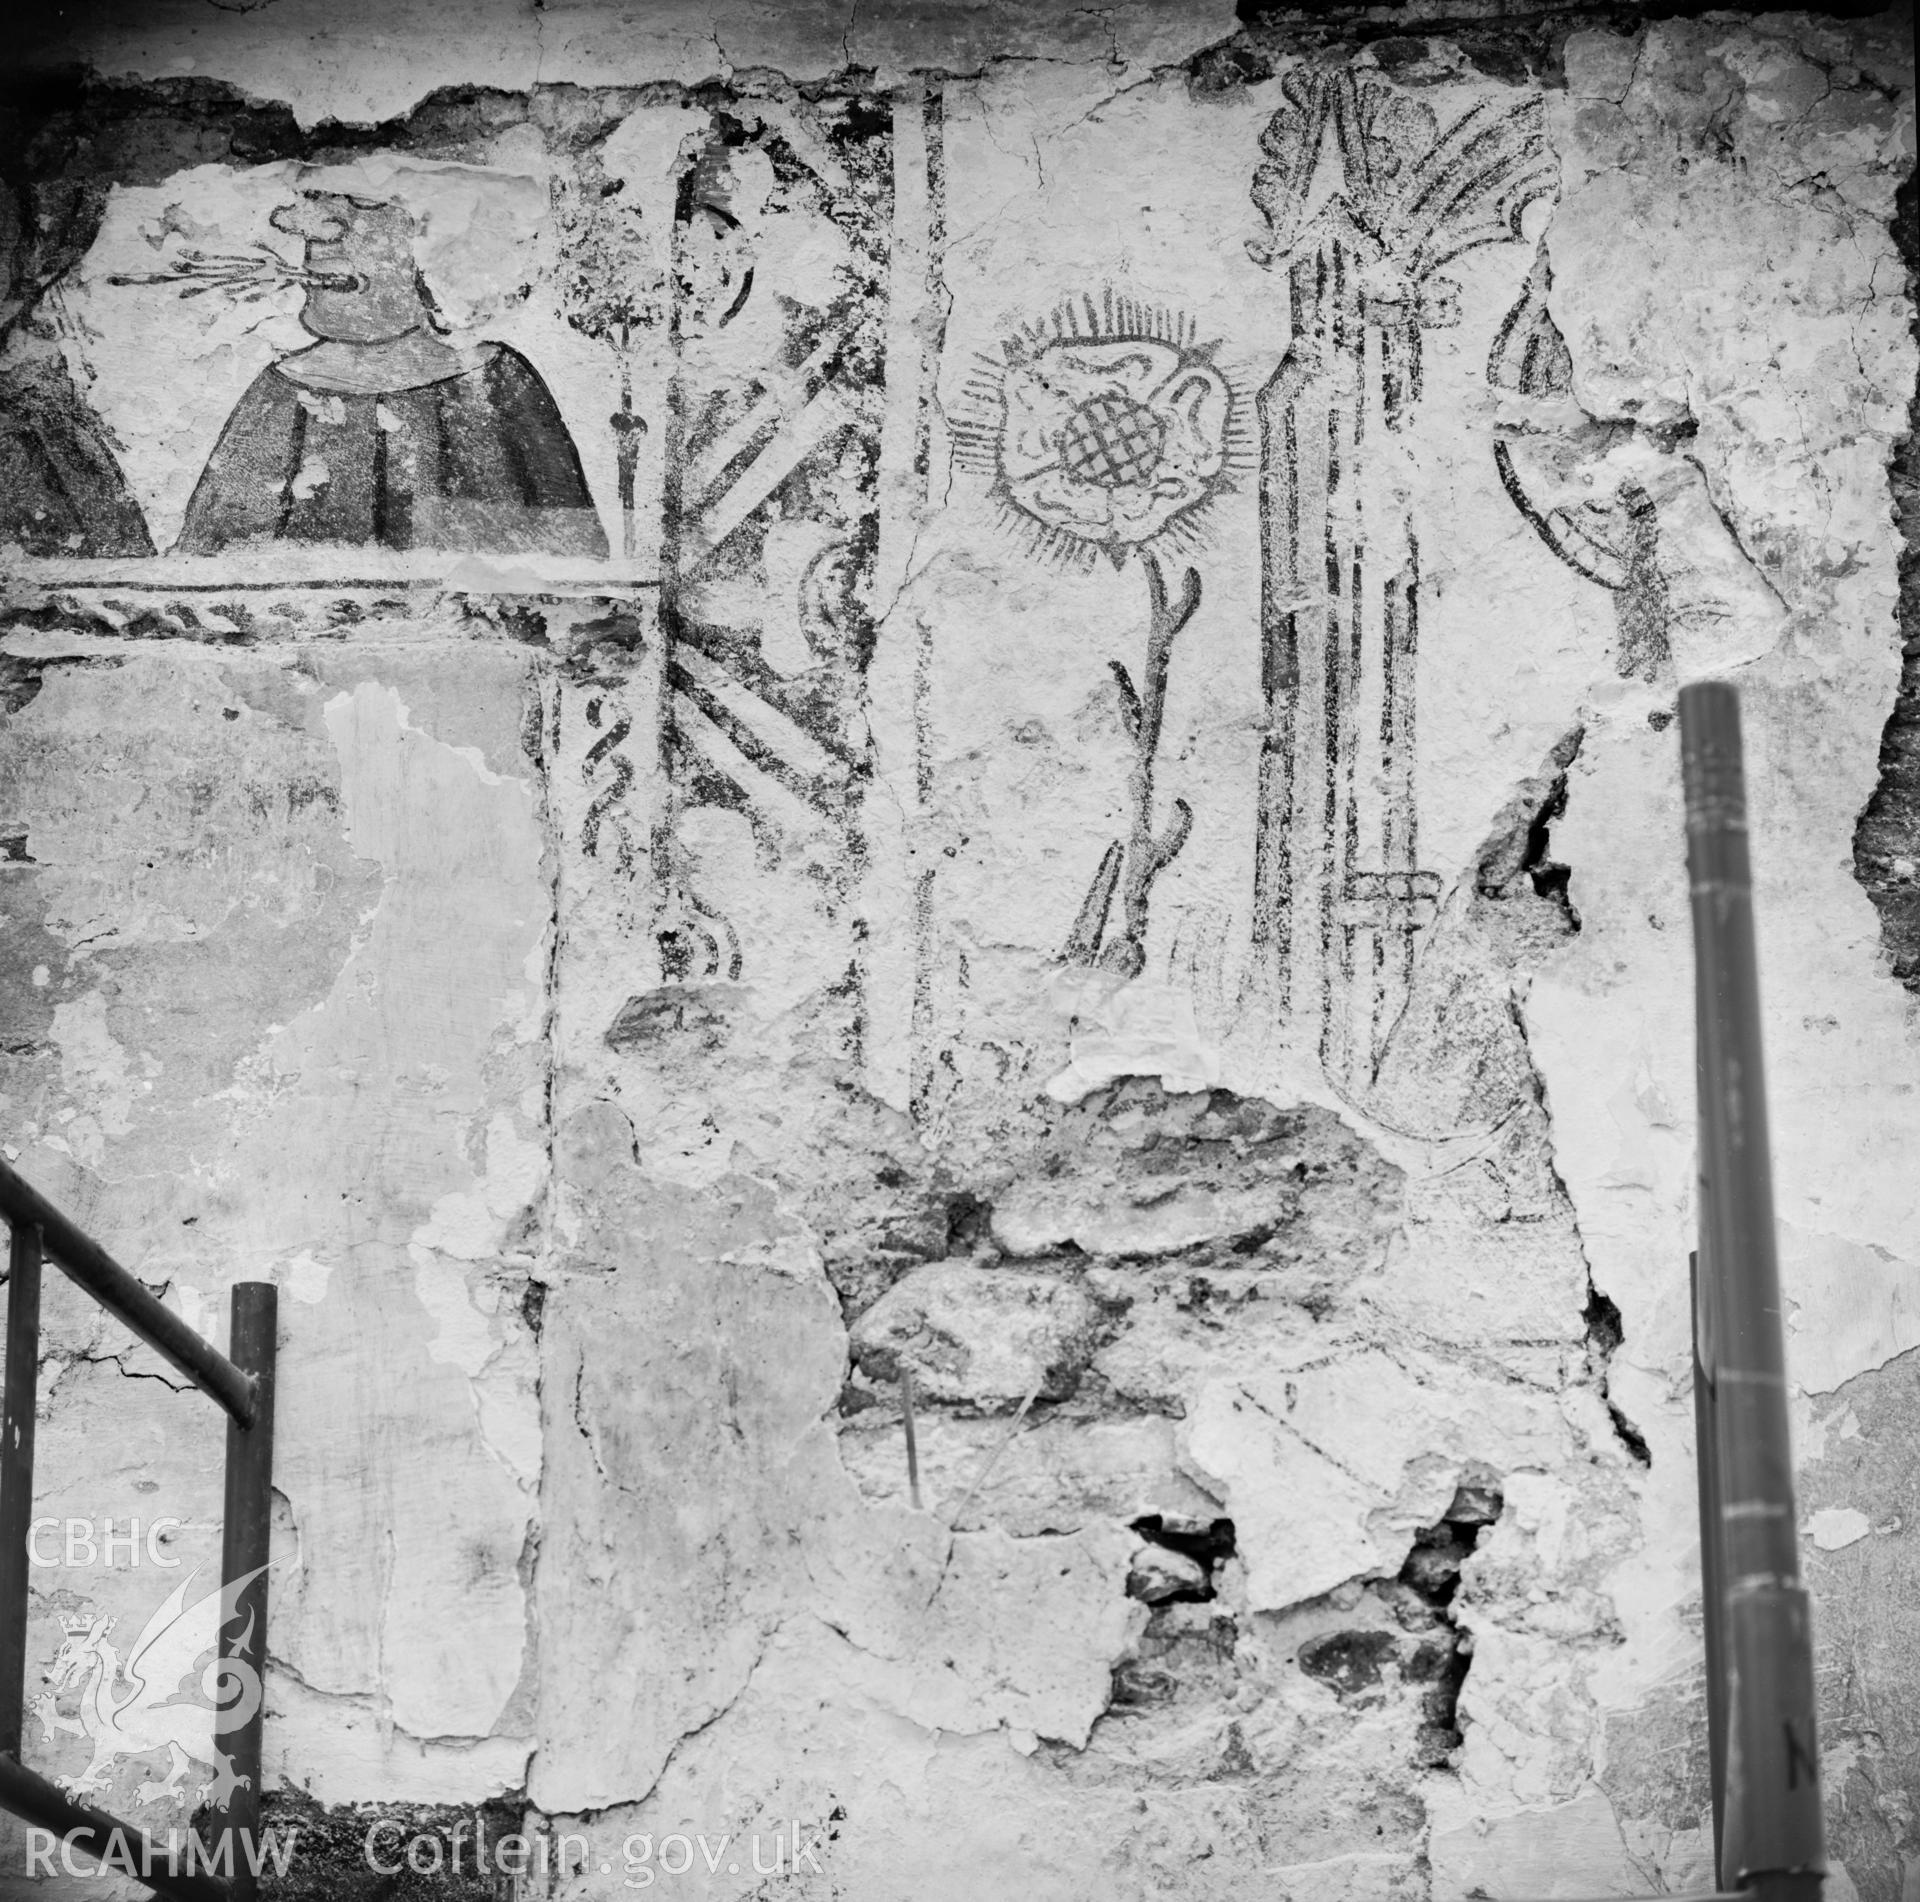 View showing detail of paintings during dismantling work